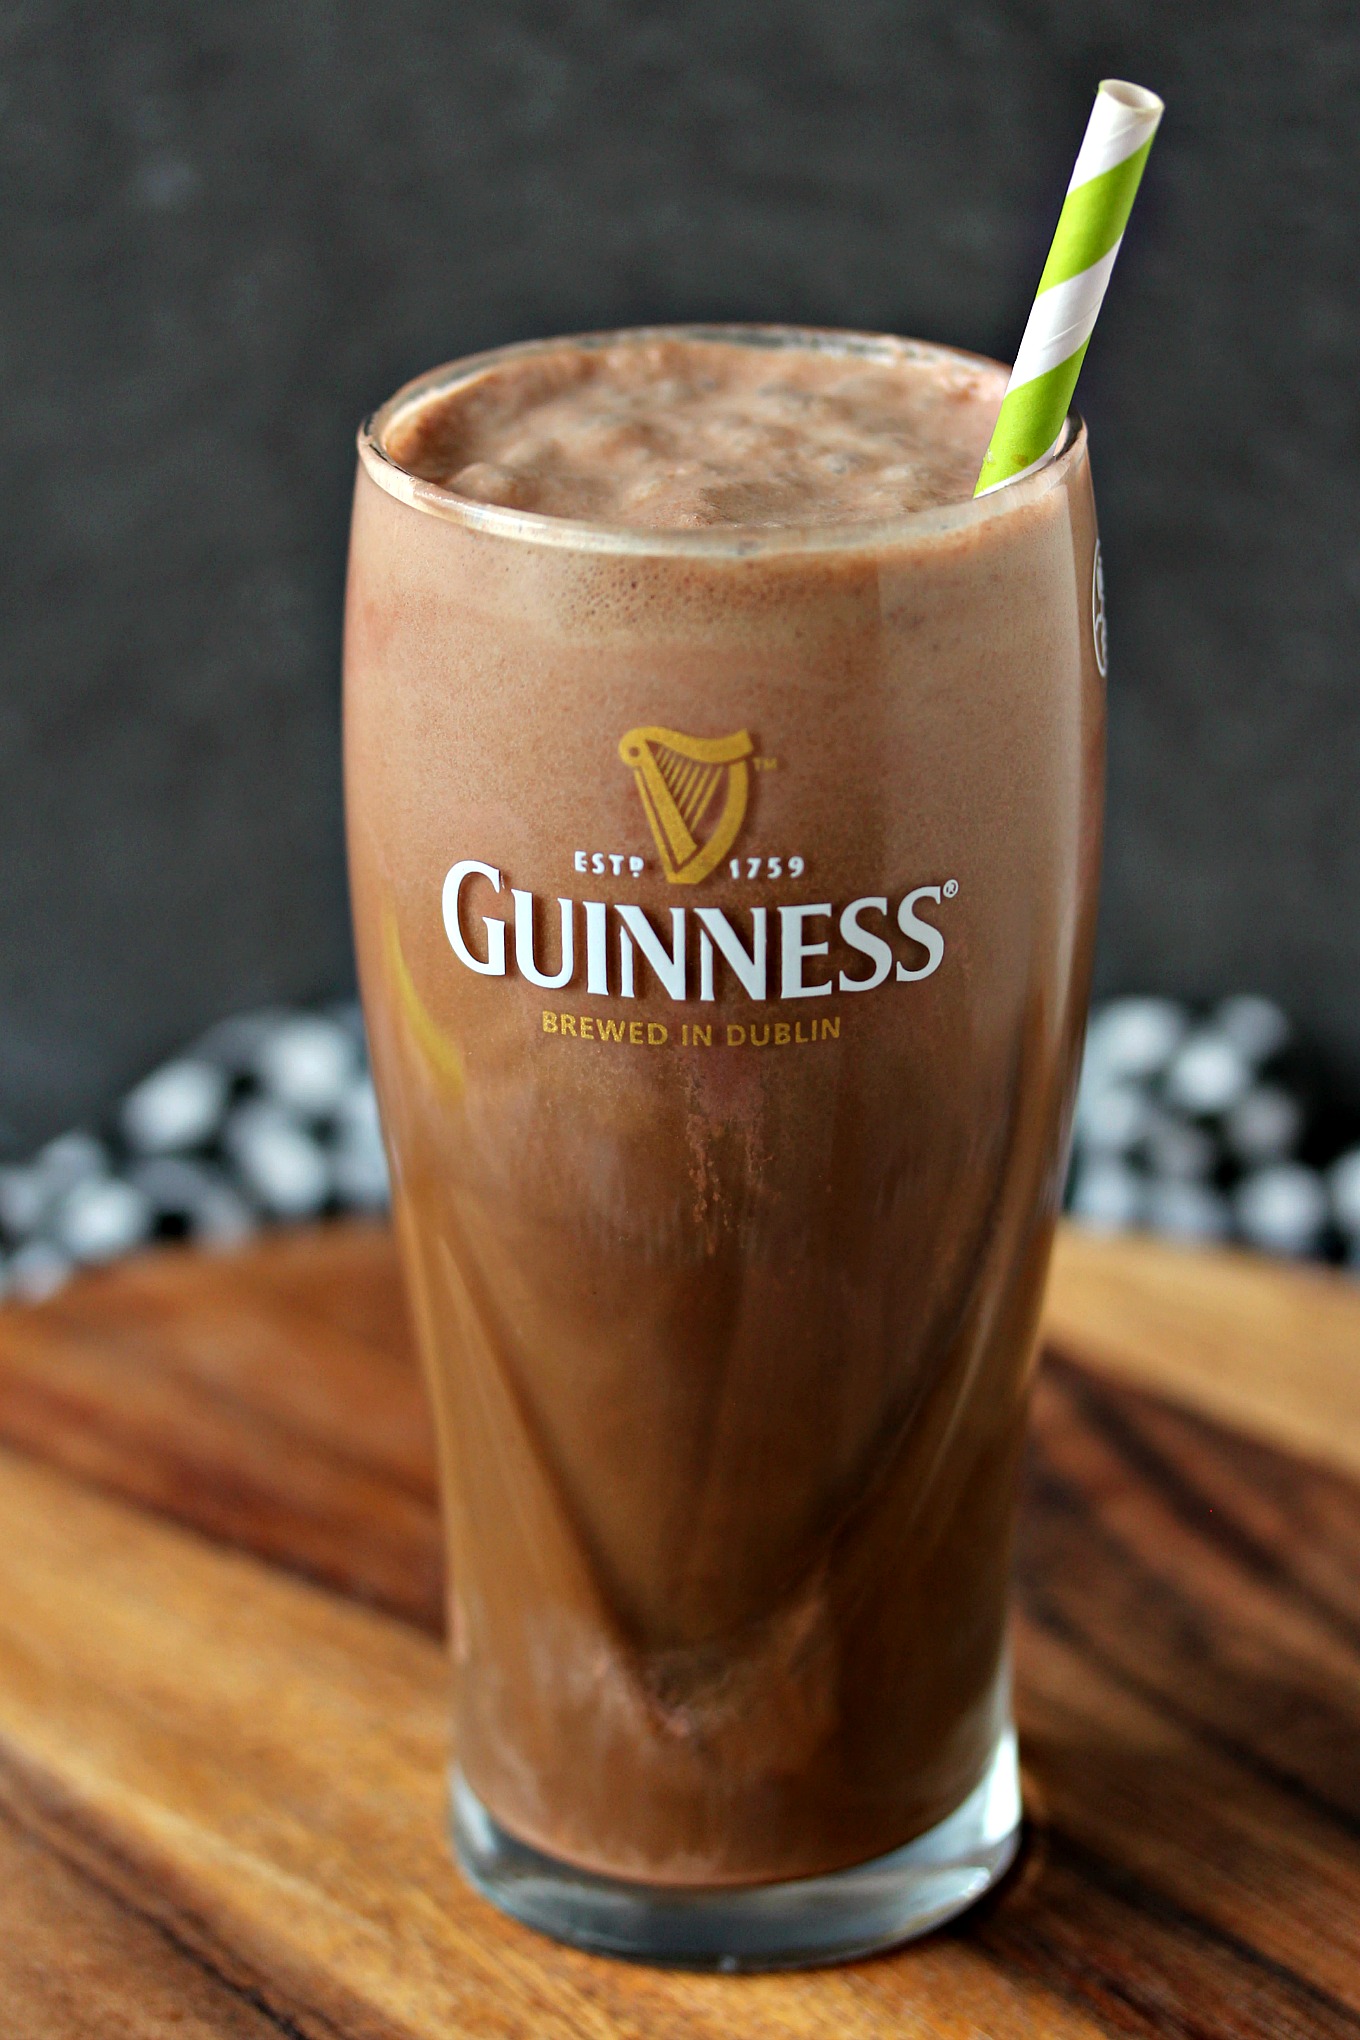 Nothing beats a homemade chocolate float, except one made with Guinness. Whether you make it for St. Patrick's Day or a random Friday, this will be a hit. Whip one up today!